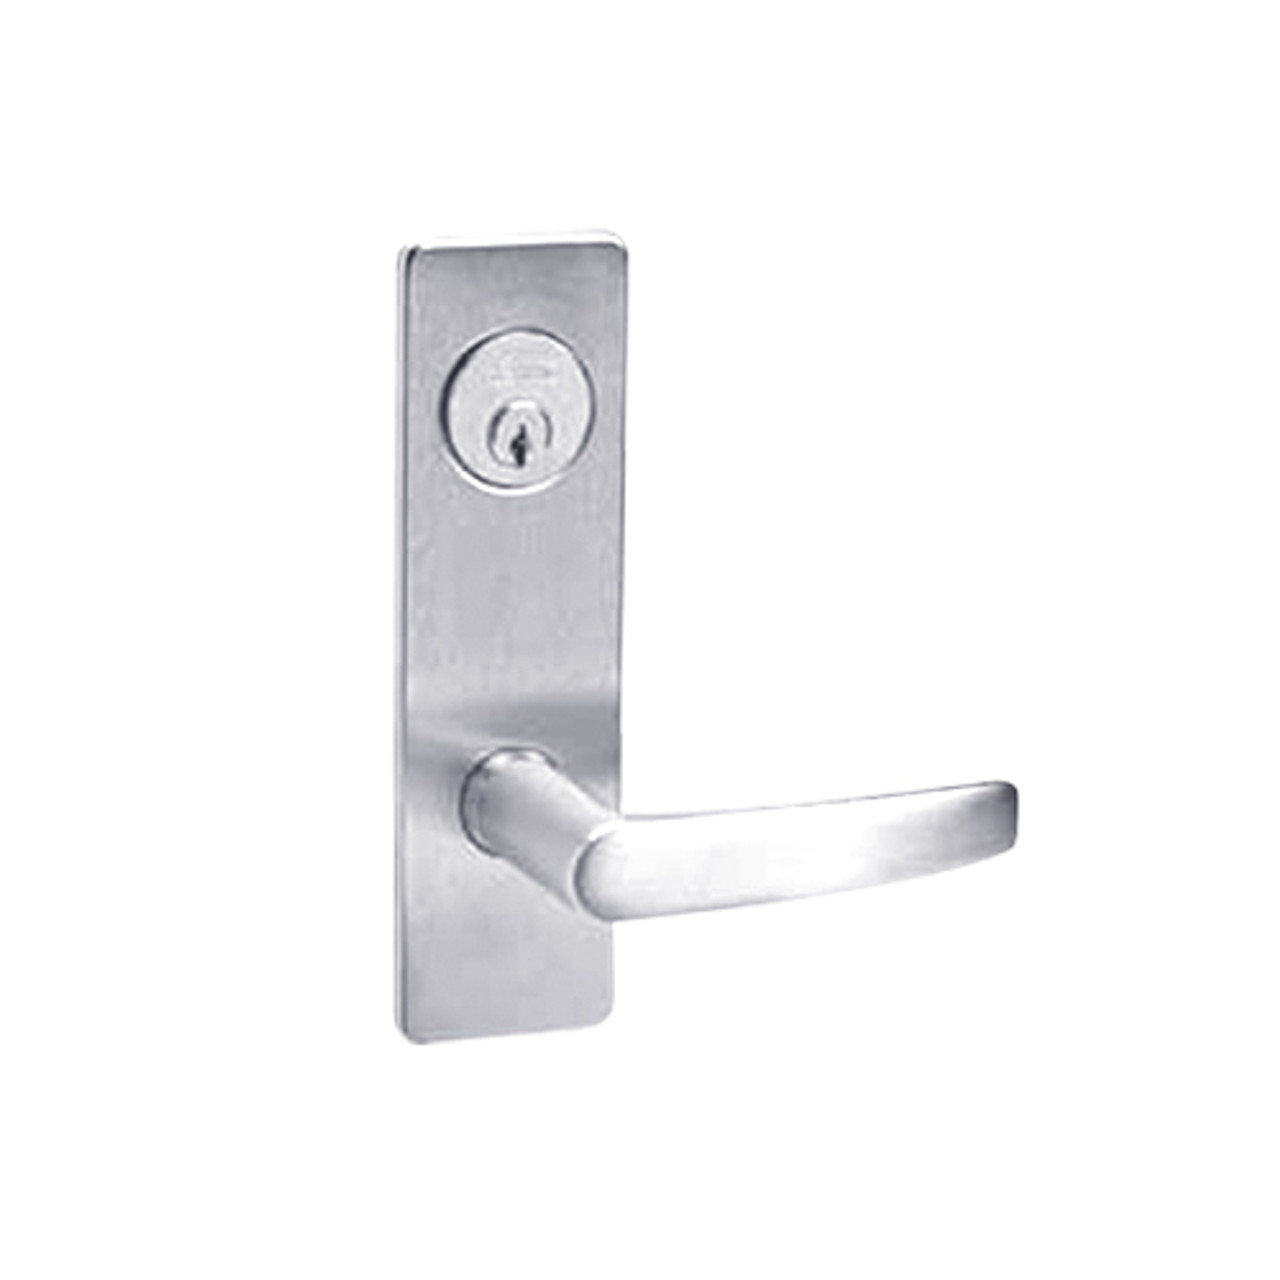 ML2065-ASR-625 Corbin Russwin ML2000 Series Mortise Dormitory Locksets with Armstrong Lever and Deadbolt in Bright Chrome